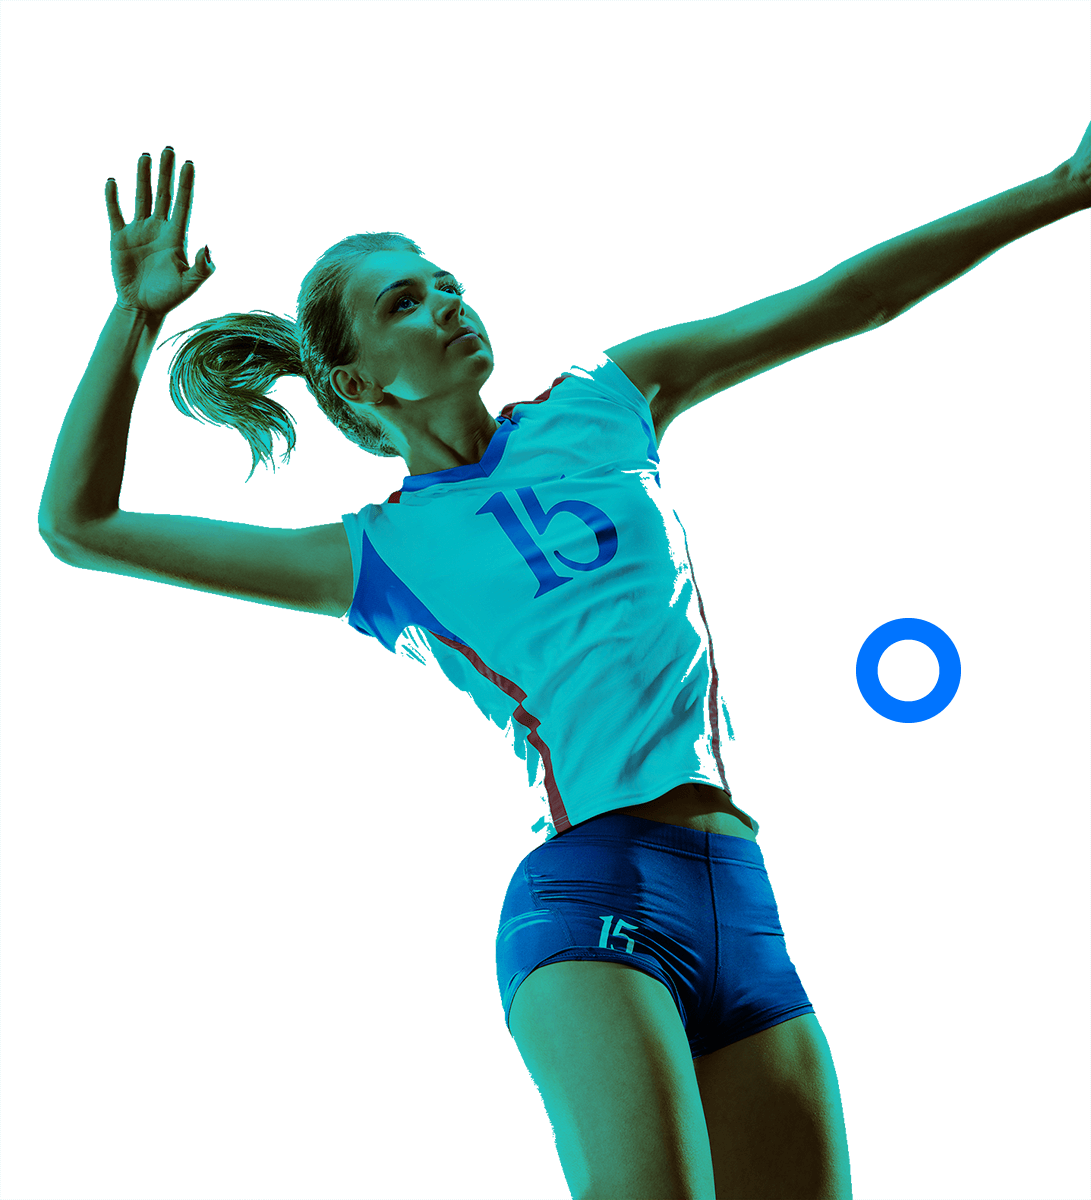 In the picture, a female volleyball player about to hit the ball.